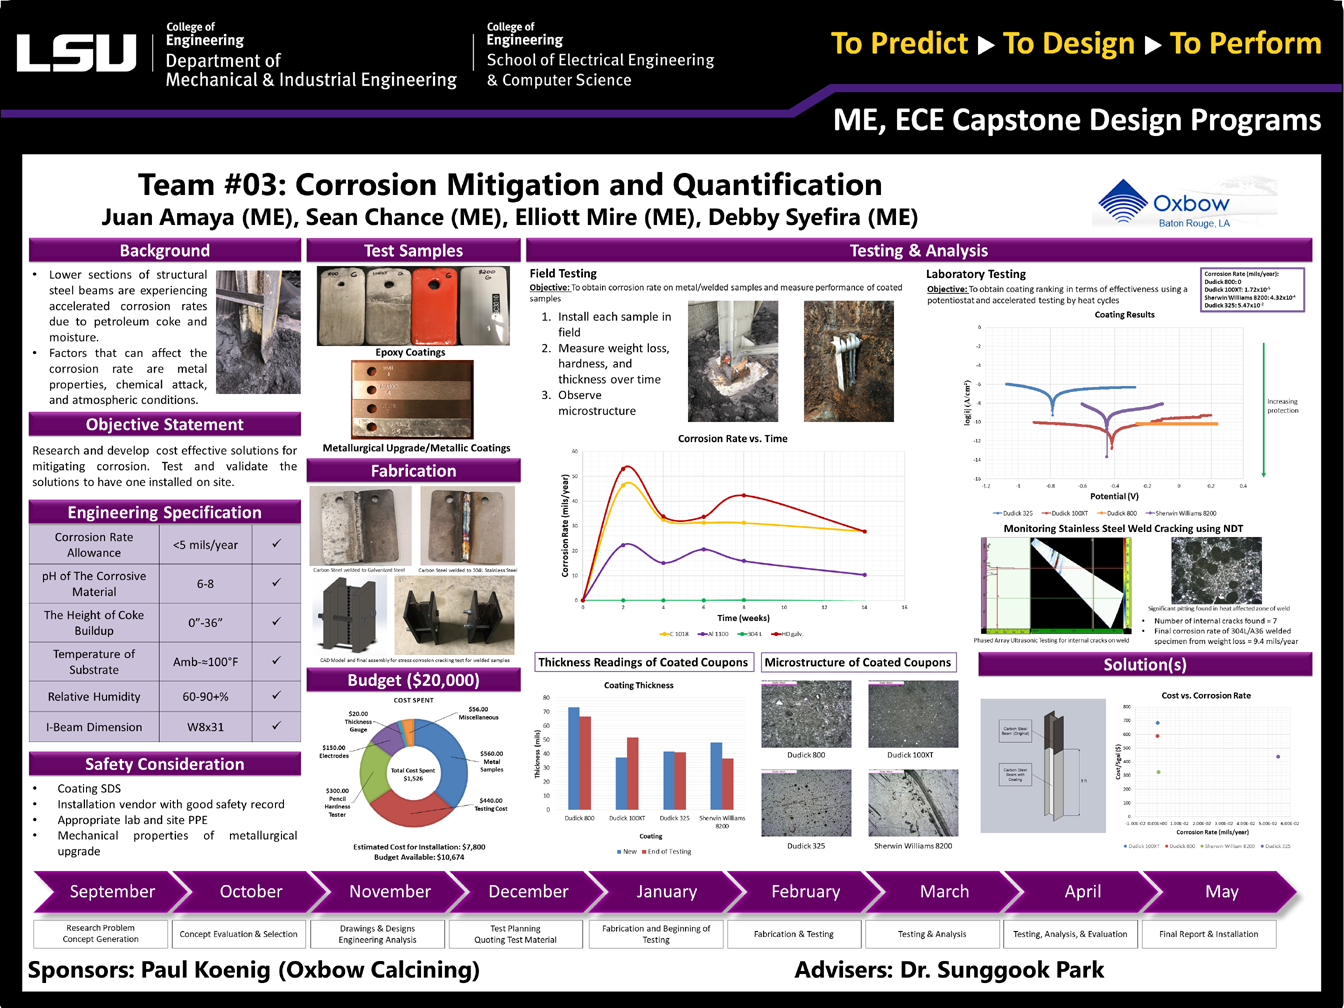 Project 3: Corrosion Treatment for Structural Supports (2019)